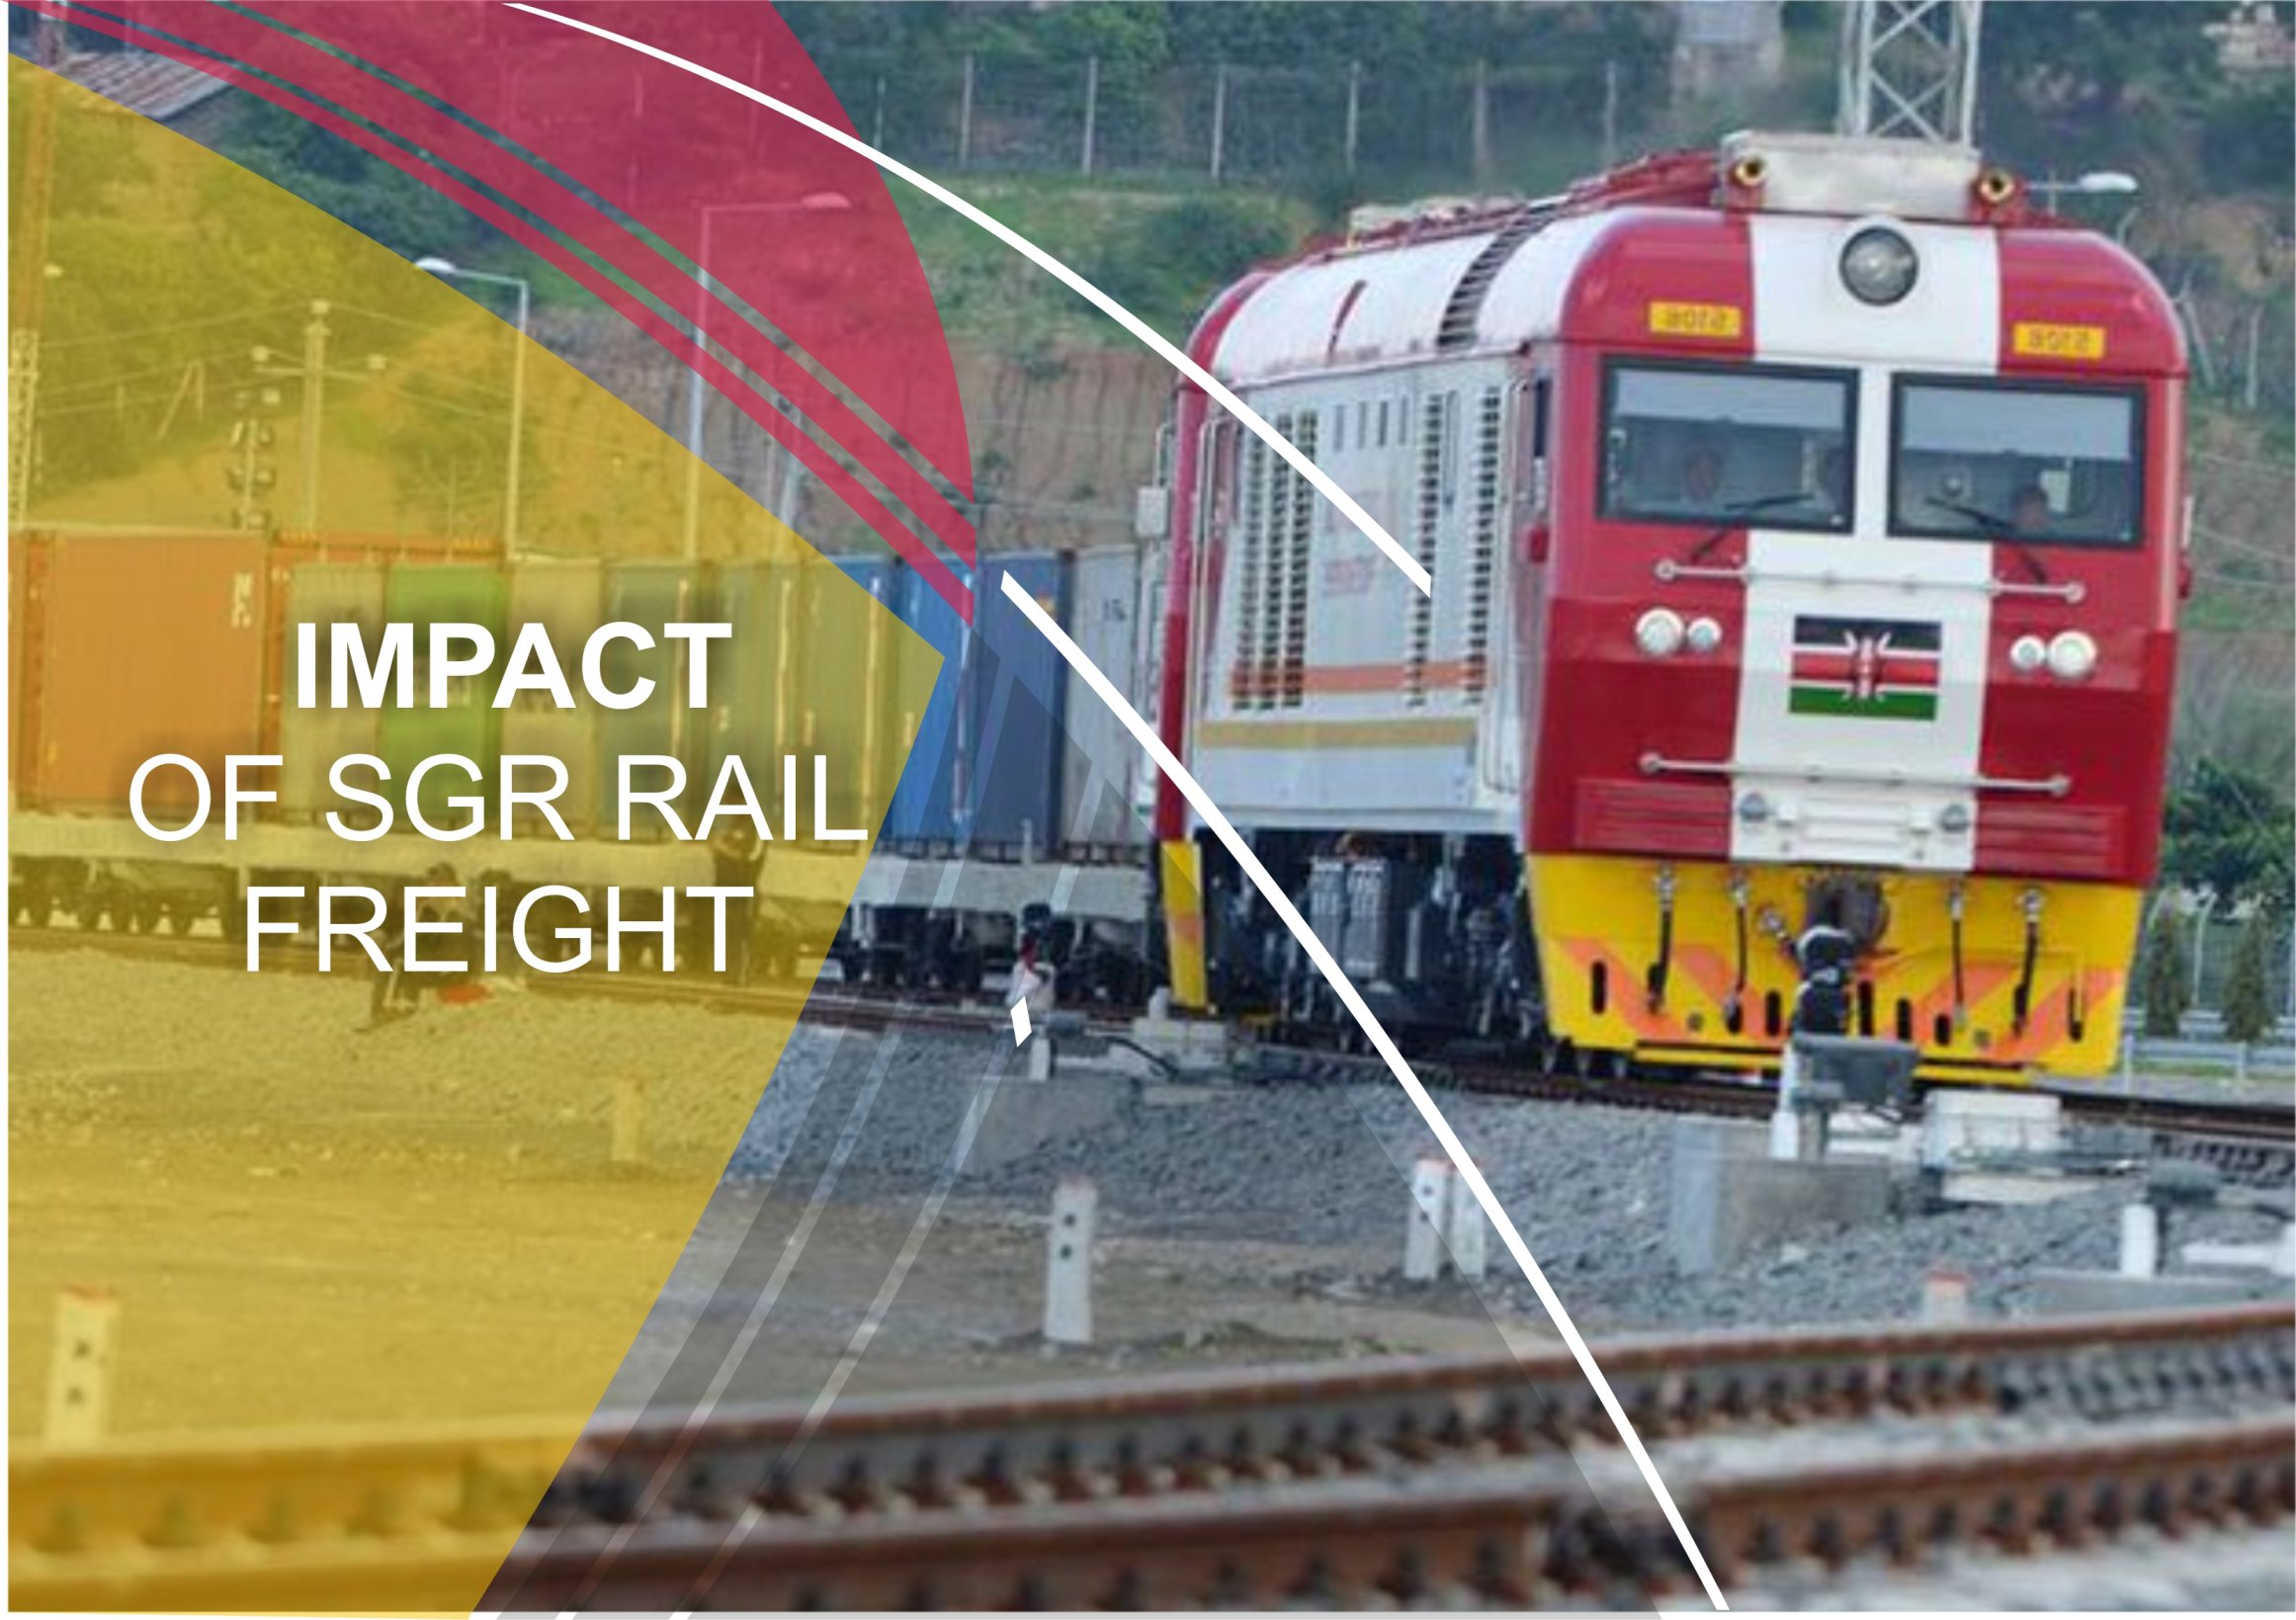 The Impact of SGR Rail Freight on the Northern Corridor